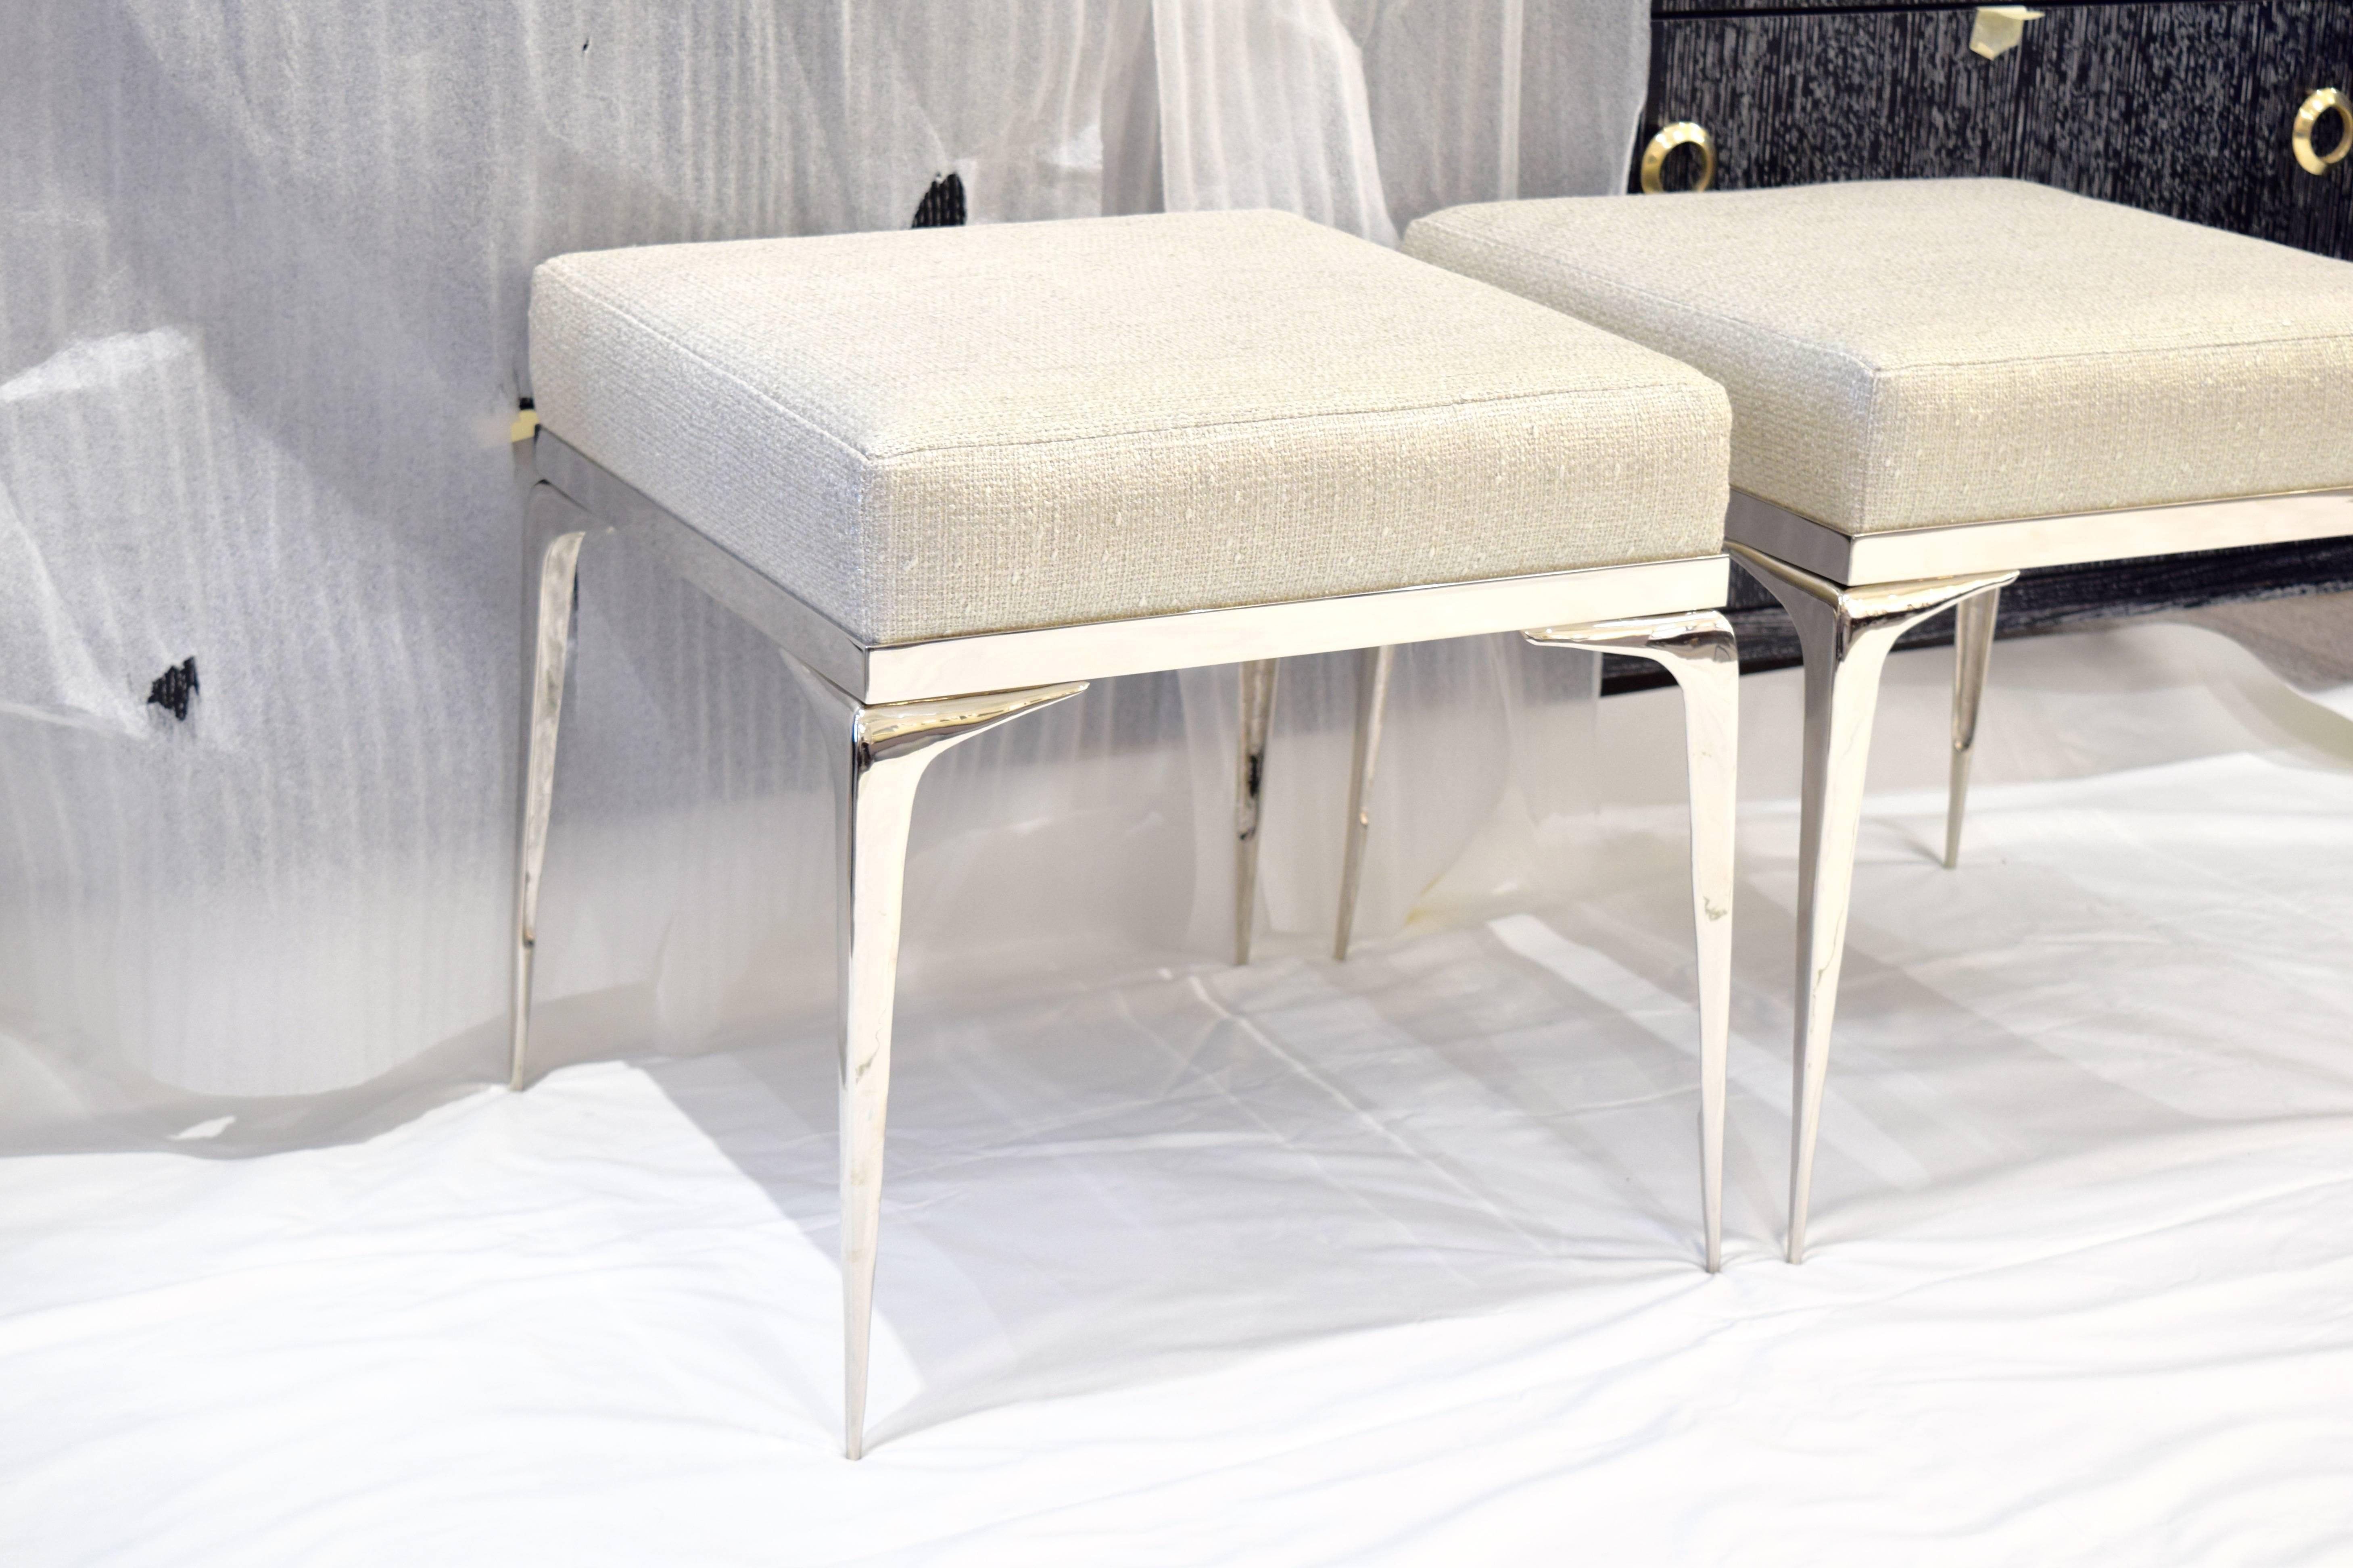 Elegant pair of square signature Stiletto Ottomans designed by Irwin Feld Design for CF Modern.
An upholstered cushion is set in a polished nickel frame which attaches to four hand cast and hand polished nickel sculptural 